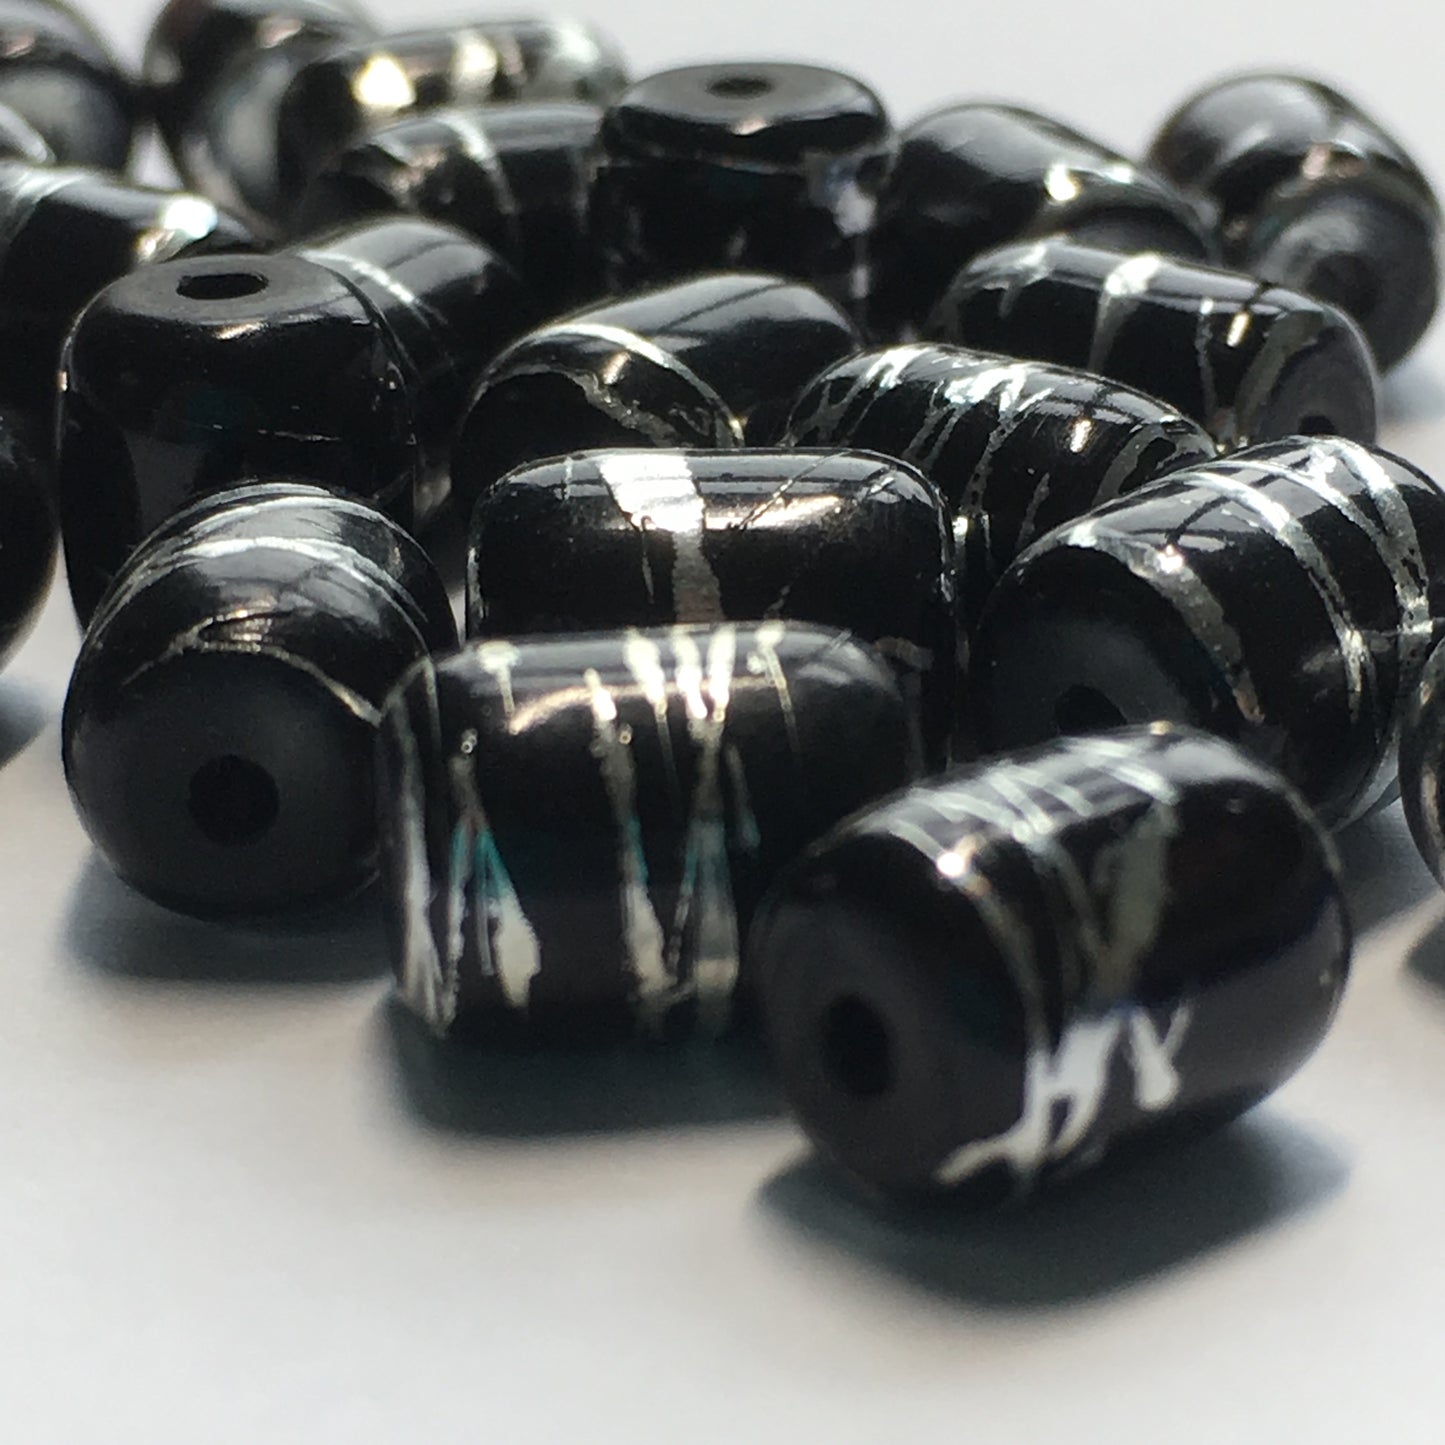 Opaque Black Glass Barrel Beads with Silver Drizzles, 10 x 8 mm, 18 Beads